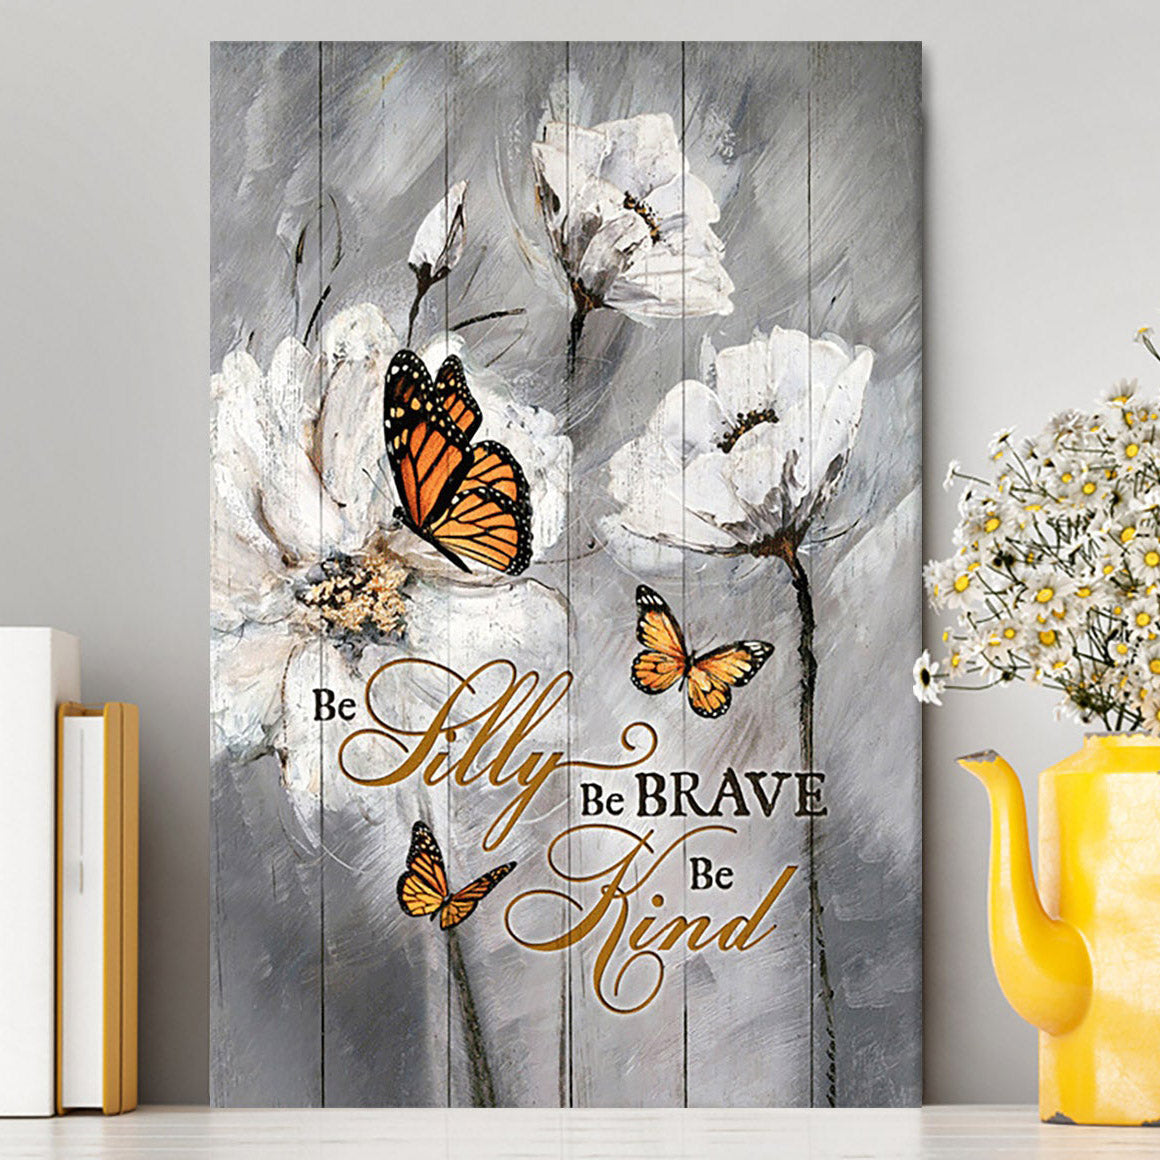 Be Silly Be Brave Be Kind Monarch Butterfly White Flower Canvas Art - Bible Verse Wall Art - Christian Inspirational Wall Decor